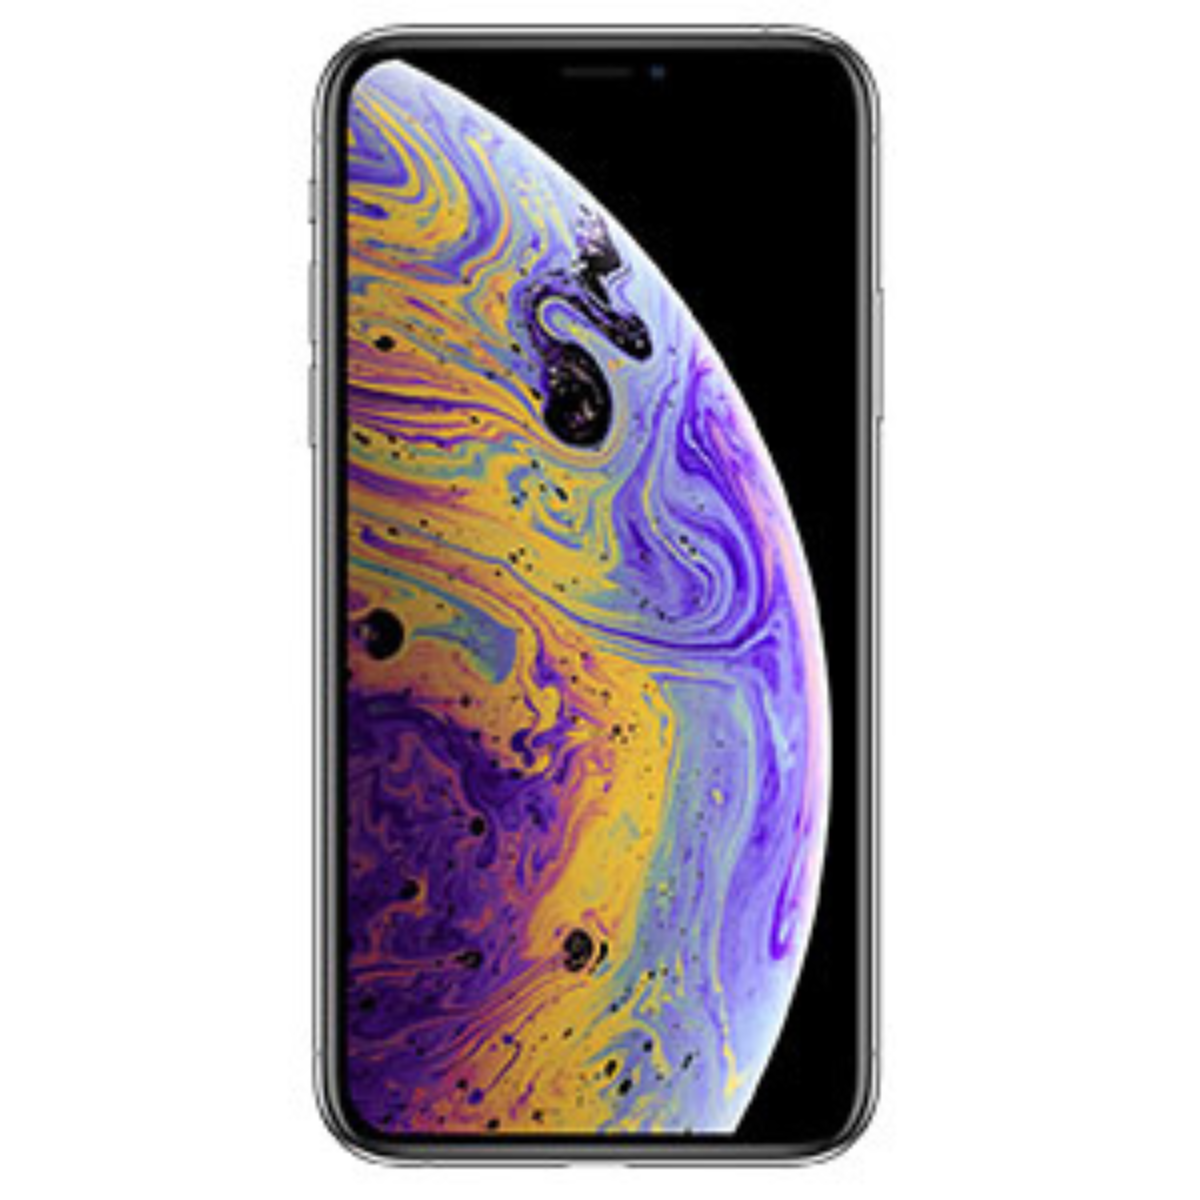 IPHONE XS a 26€/mese